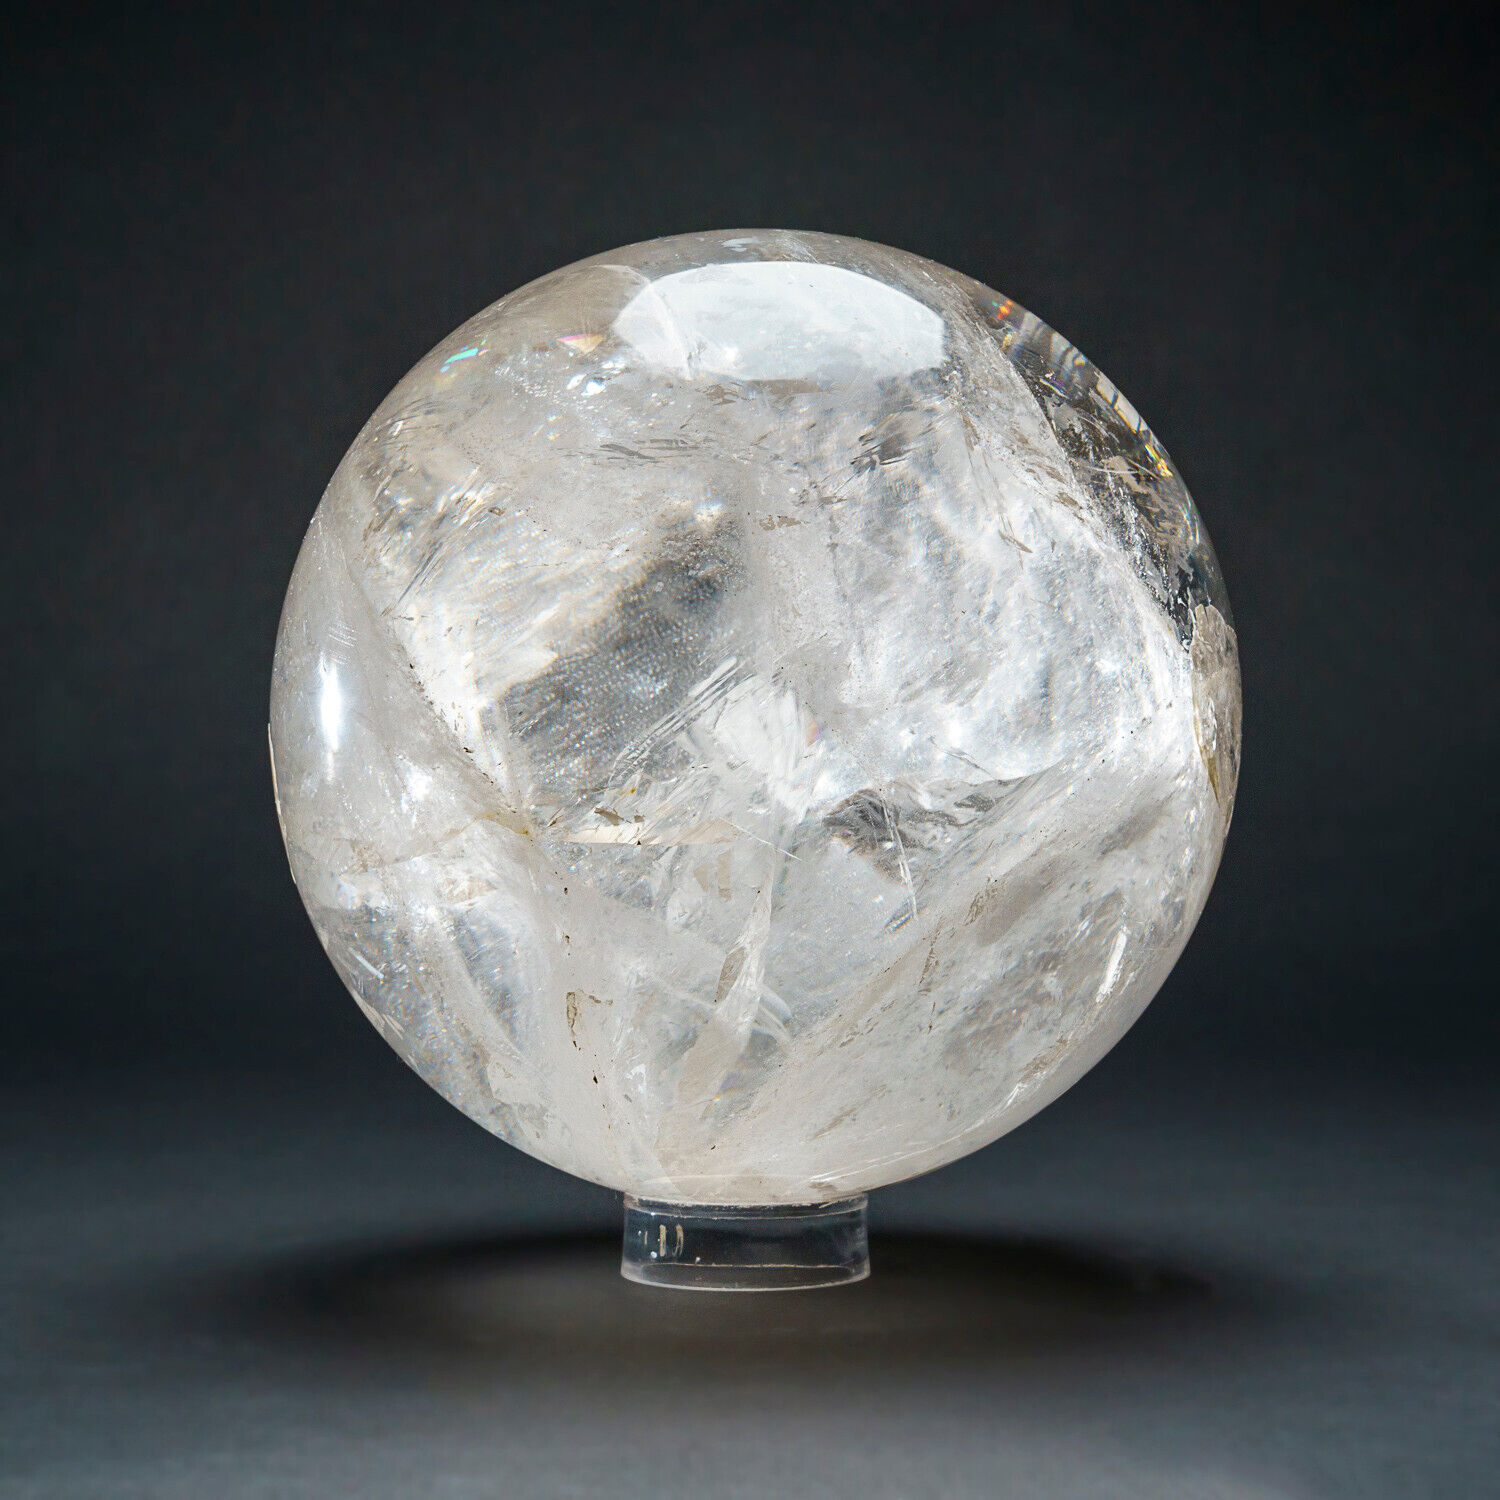 Large Genuine Polished Clear Quartz Sphere from Brazil (16 lbs)